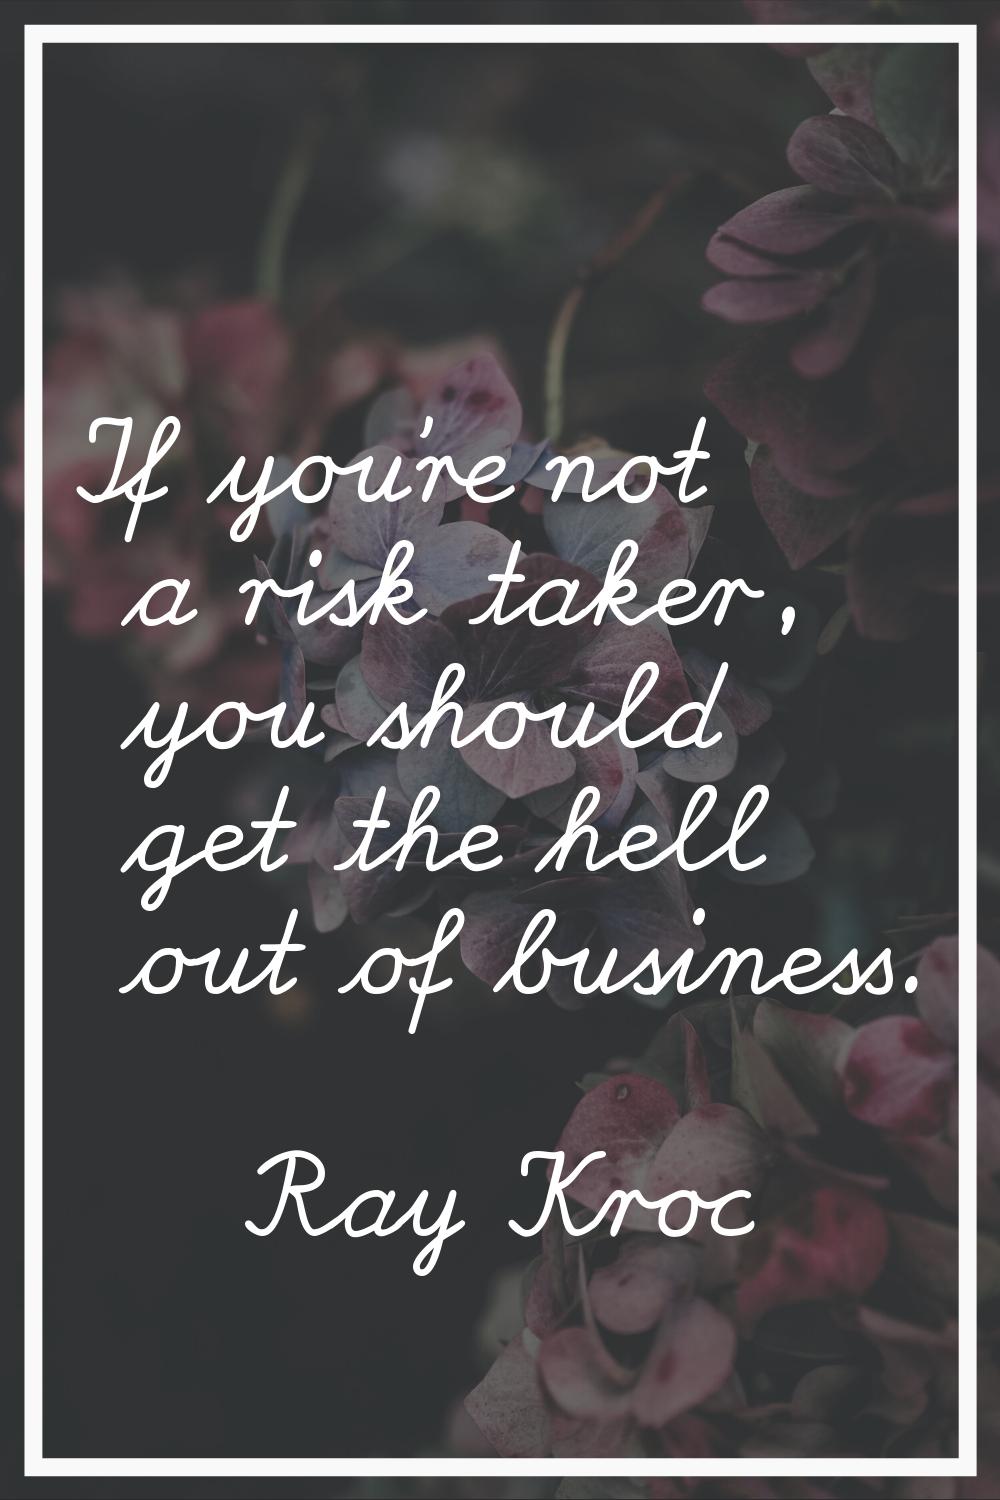 If you're not a risk taker, you should get the hell out of business.